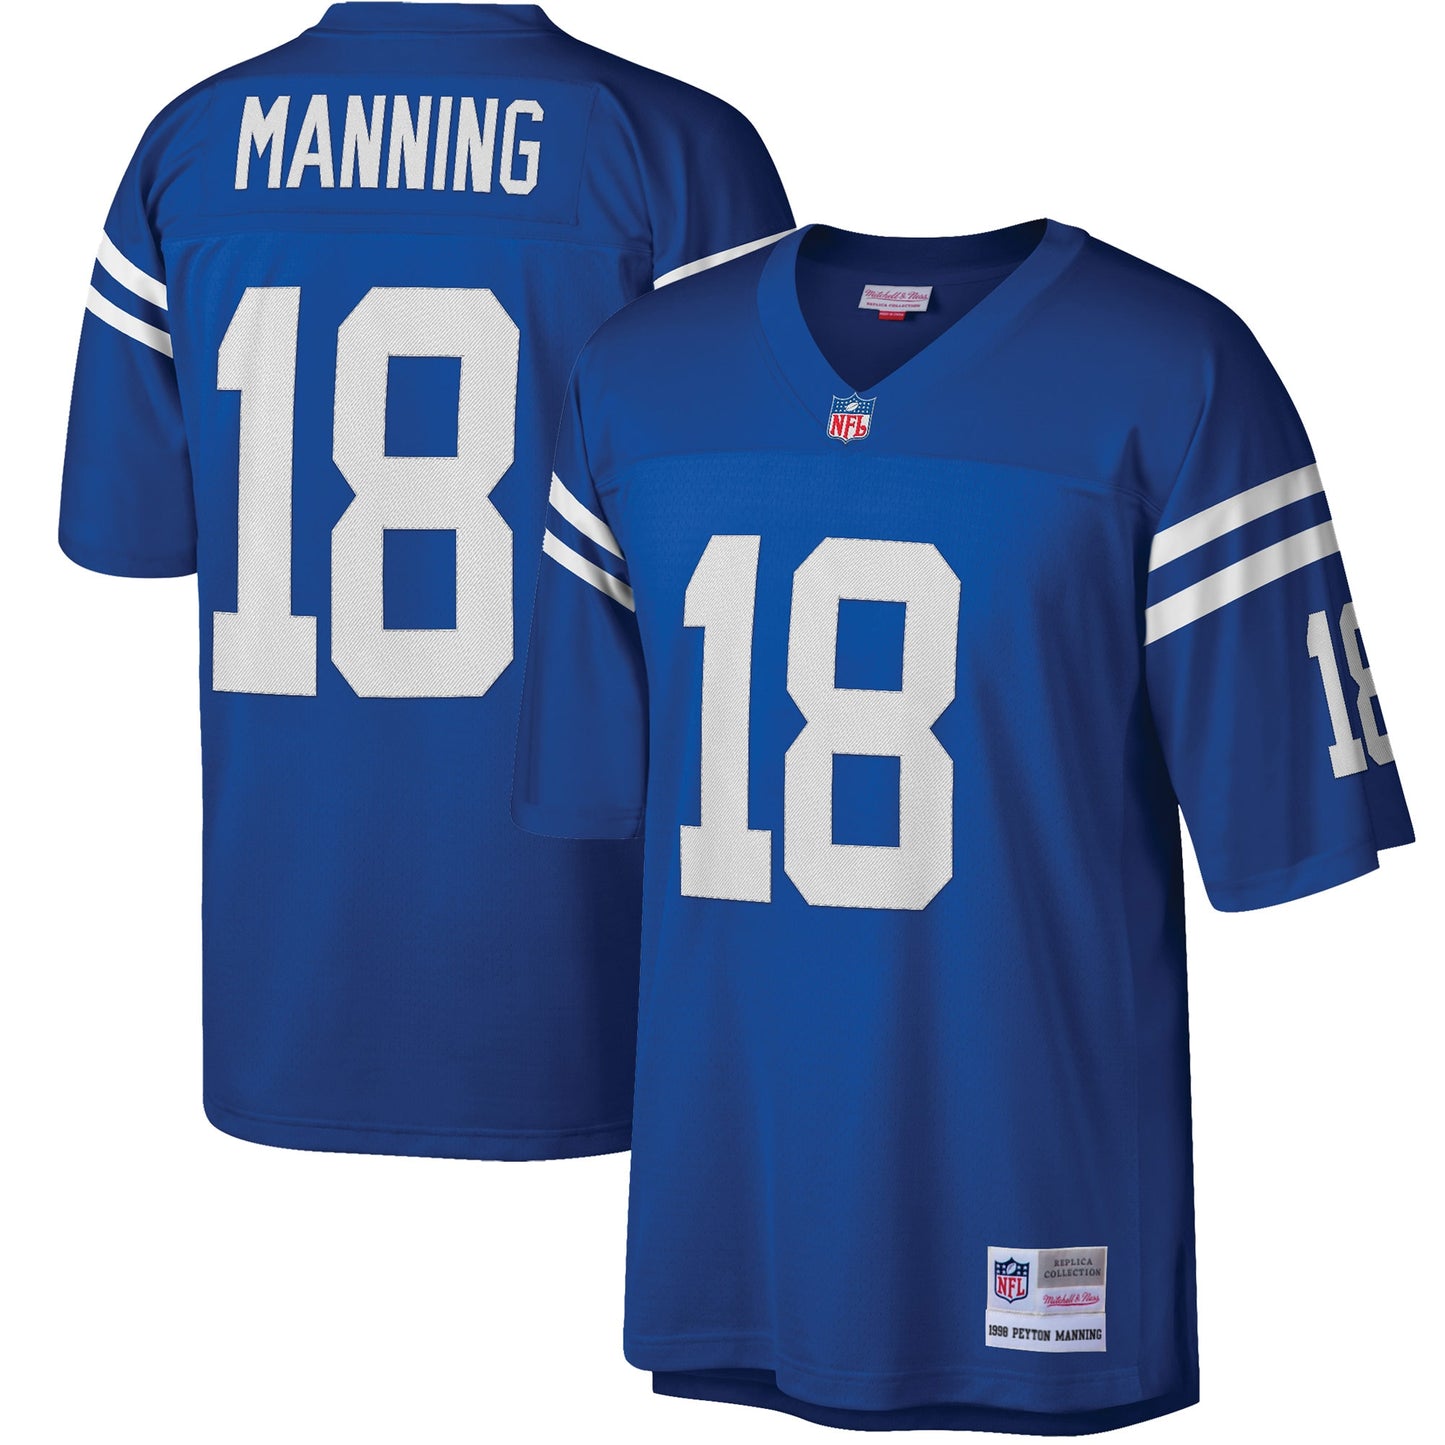 Peyton Manning Indianapolis Colts Mitchell & Ness Big & Tall 1998 Retired Player Replica Jersey - Royal